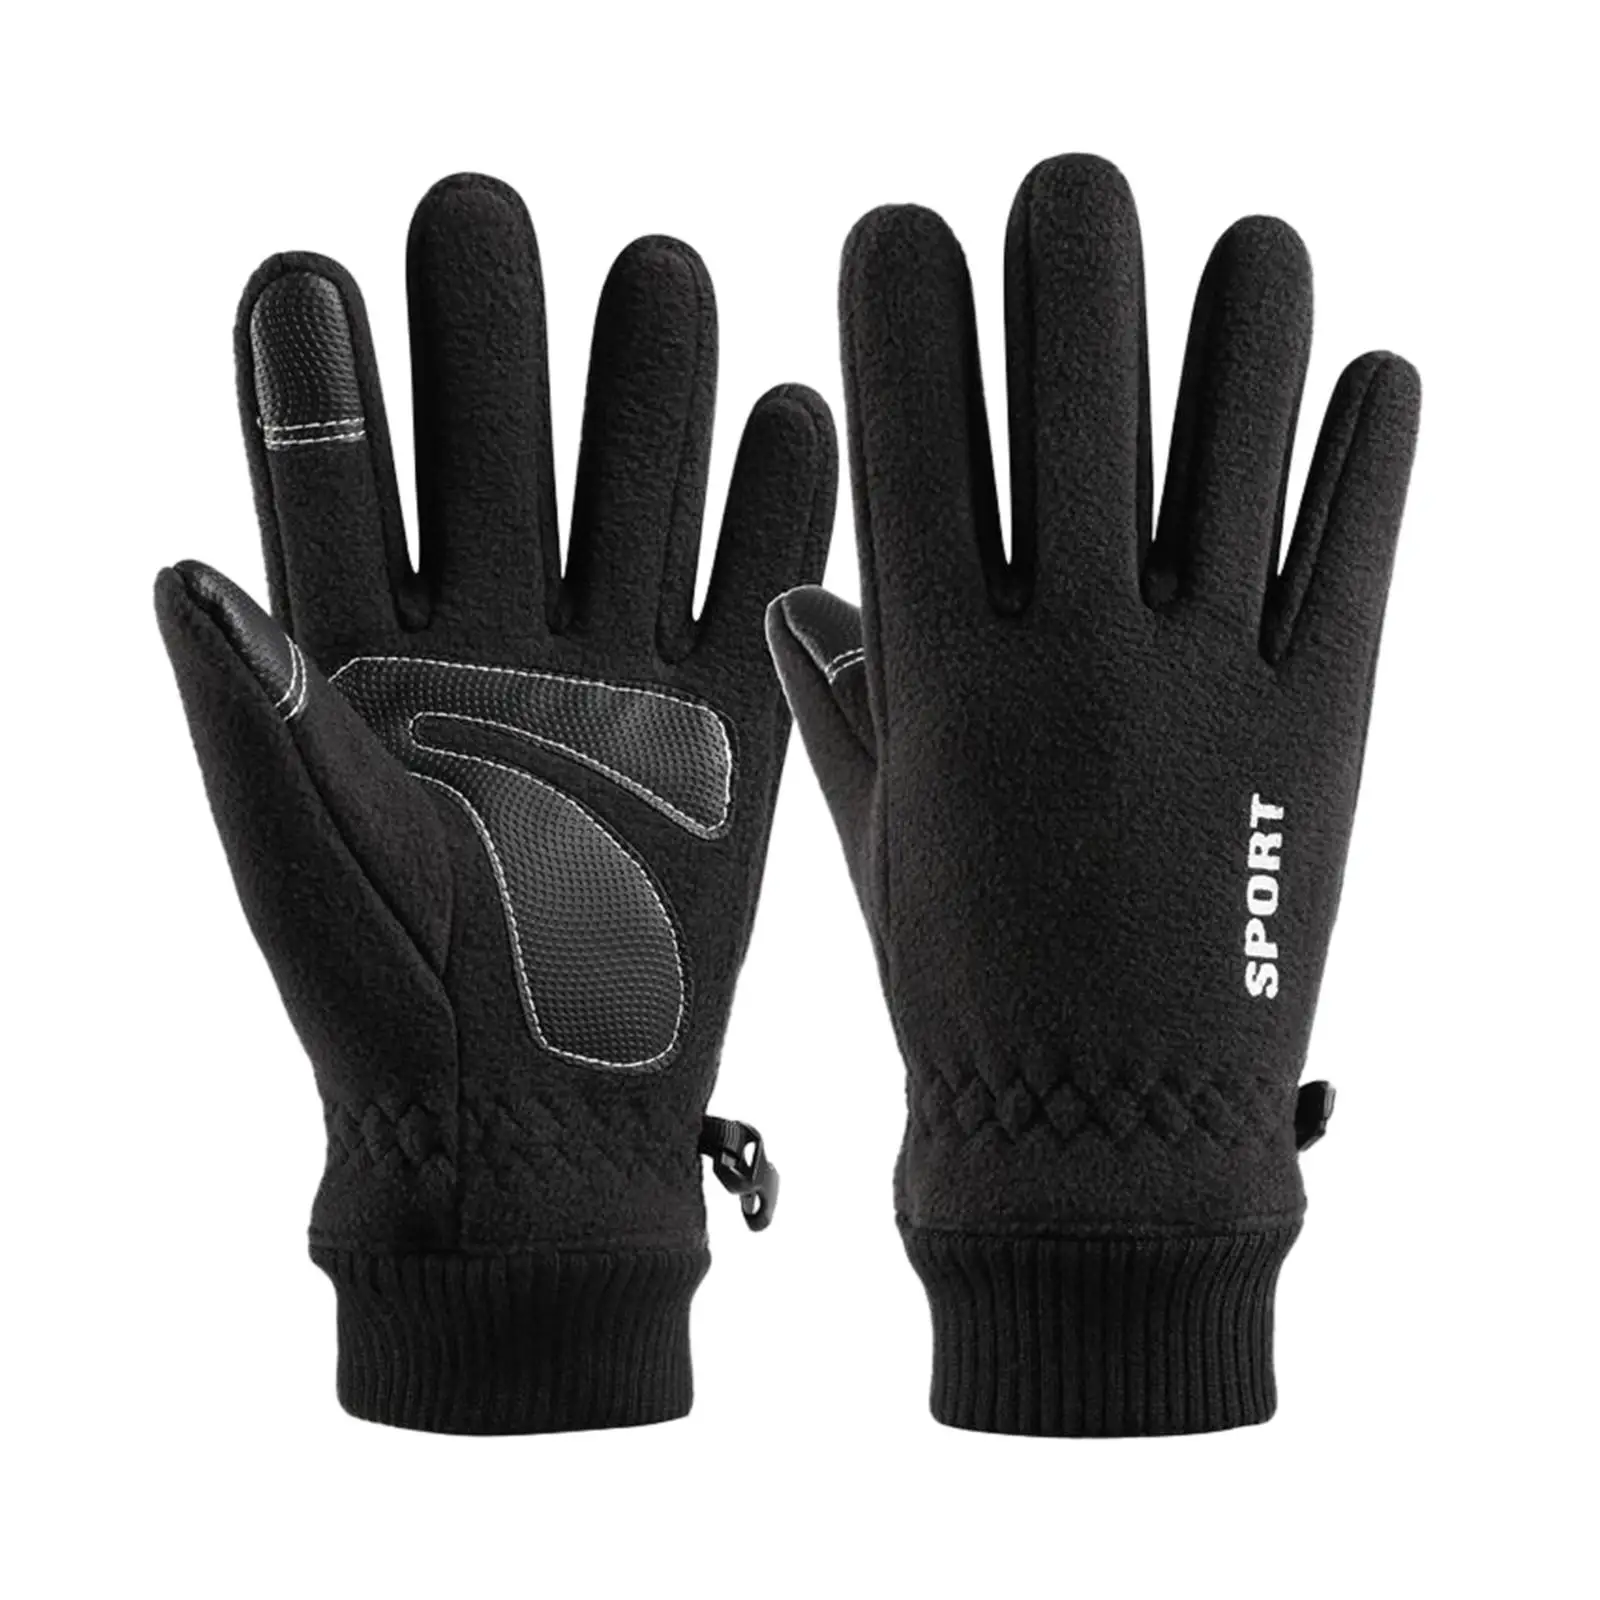 Winter Warm Gloves Non Slip Windproof Hand Protection Touch Screen for Running Cycling Outdoor Sports Working Adults Unisex